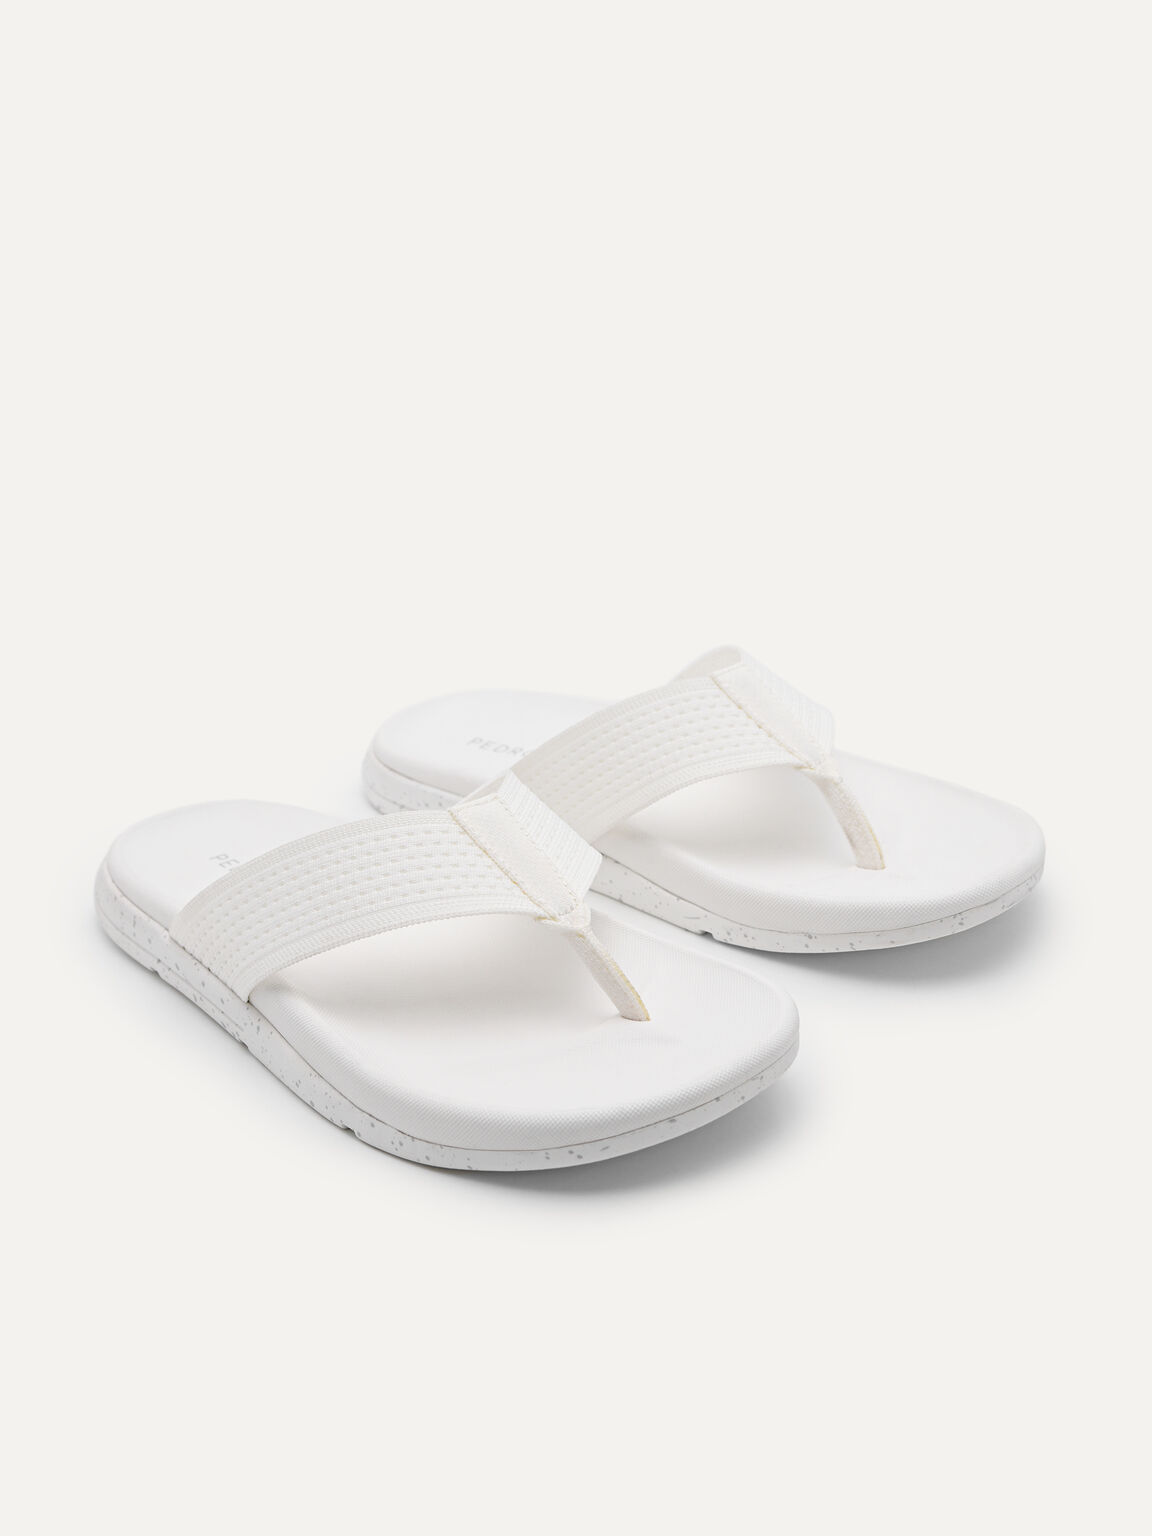 Knitted Lightweight Thong Sandals, White